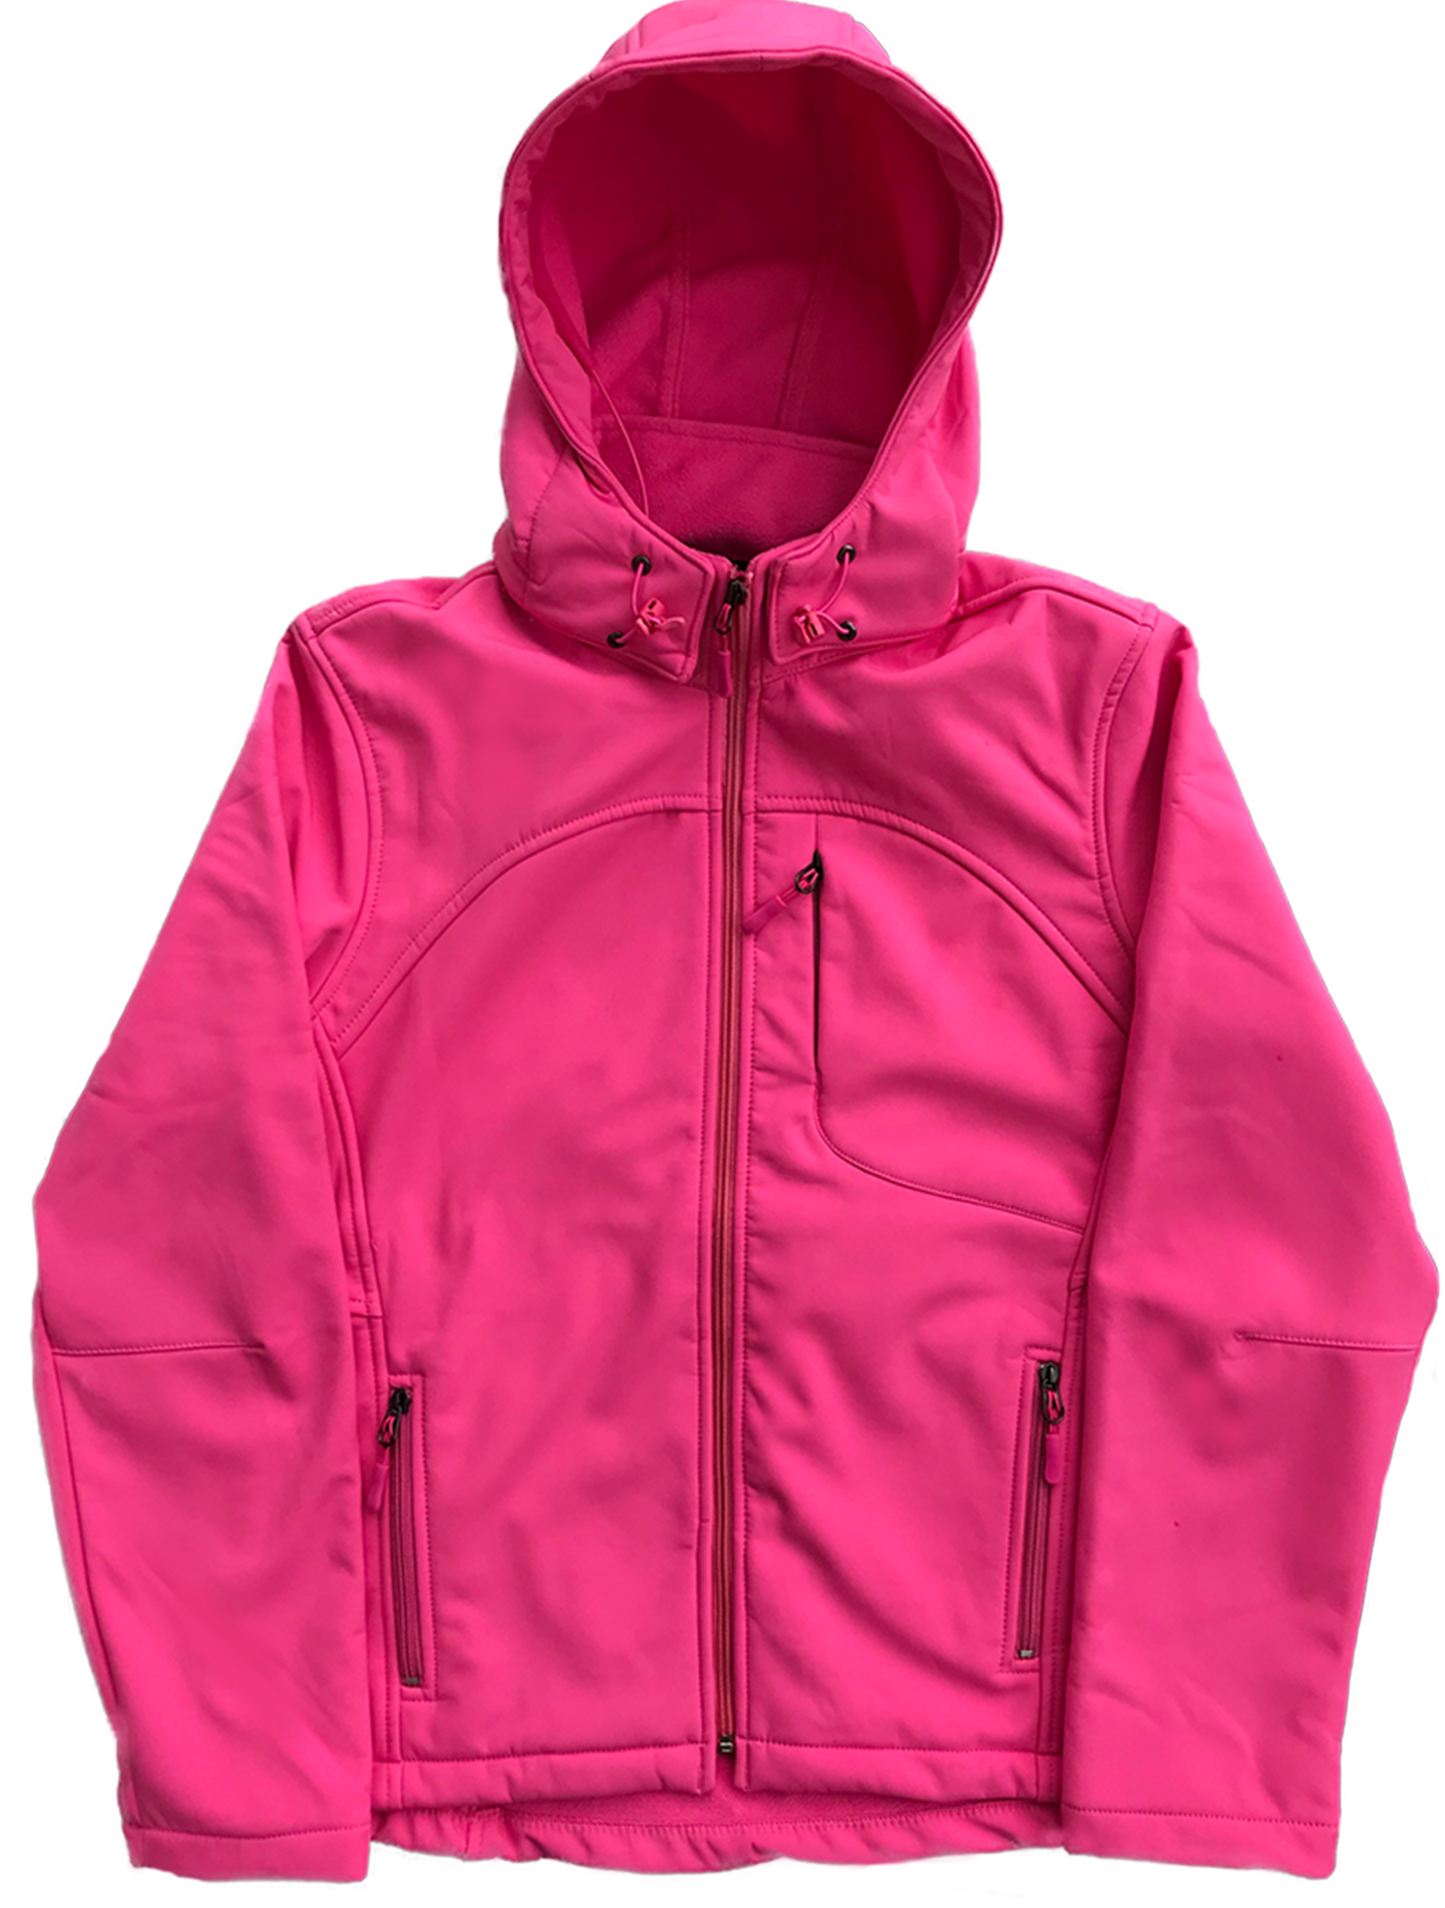 Women’s Softshell Water resistant Jacket with internal fleece lining and removable hood